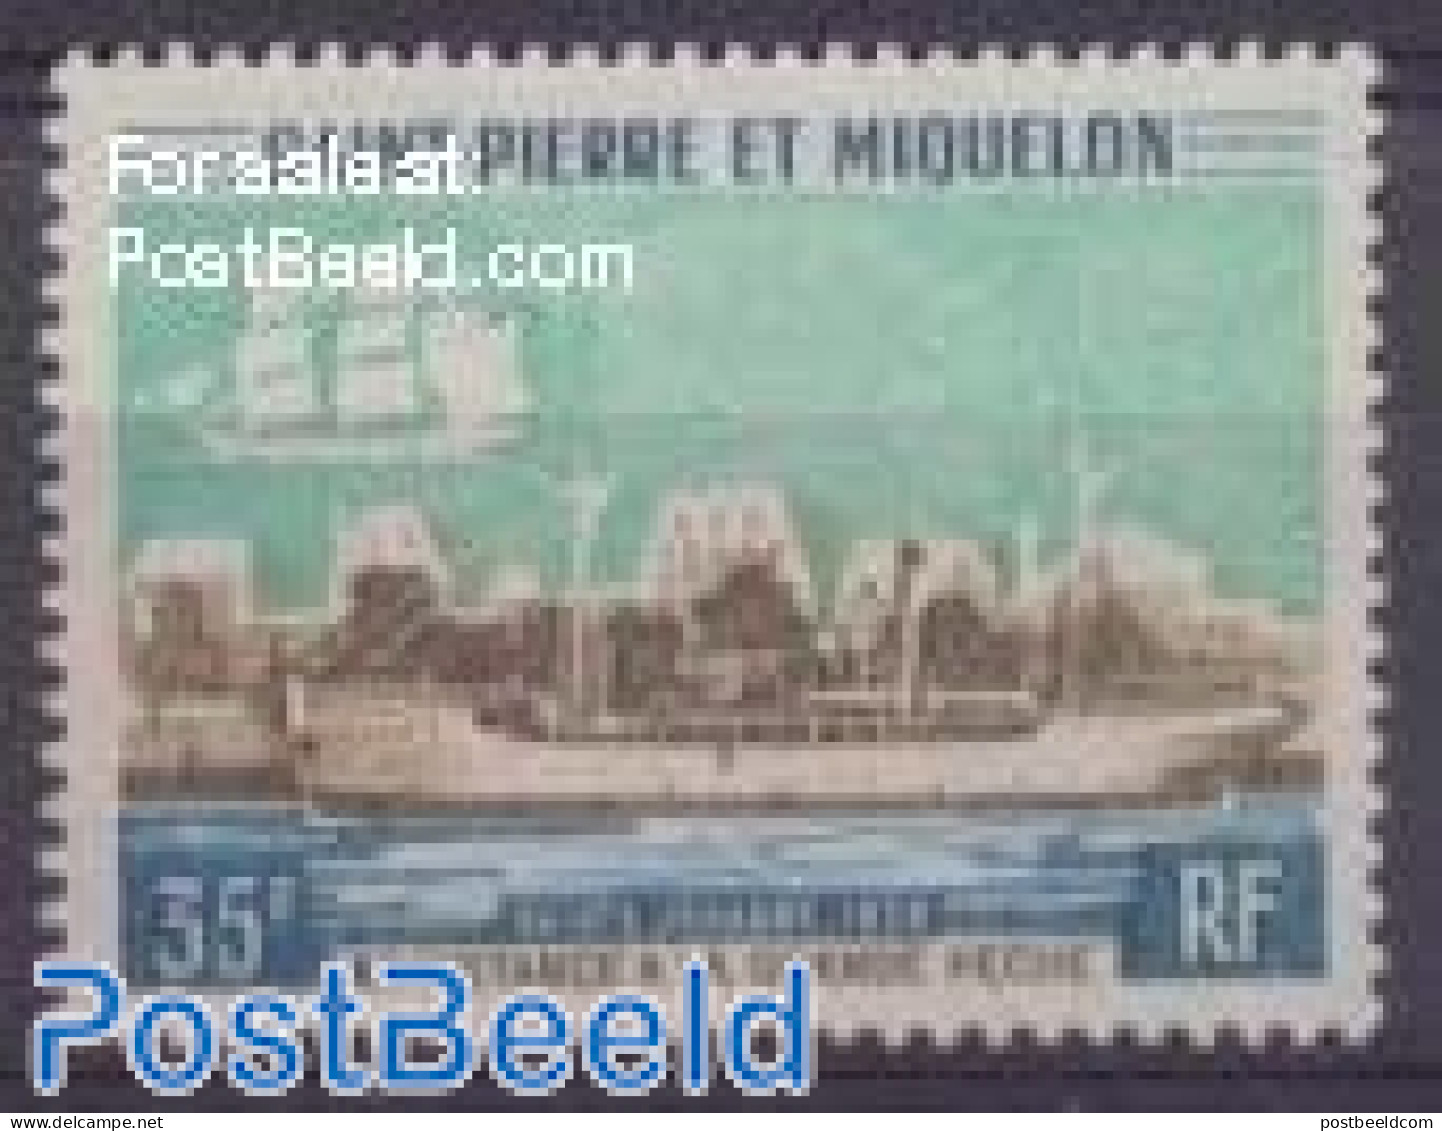 Saint Pierre And Miquelon 1971 35F, Stamp Out Of Set, Mint NH, Transport - Ships And Boats - Boten